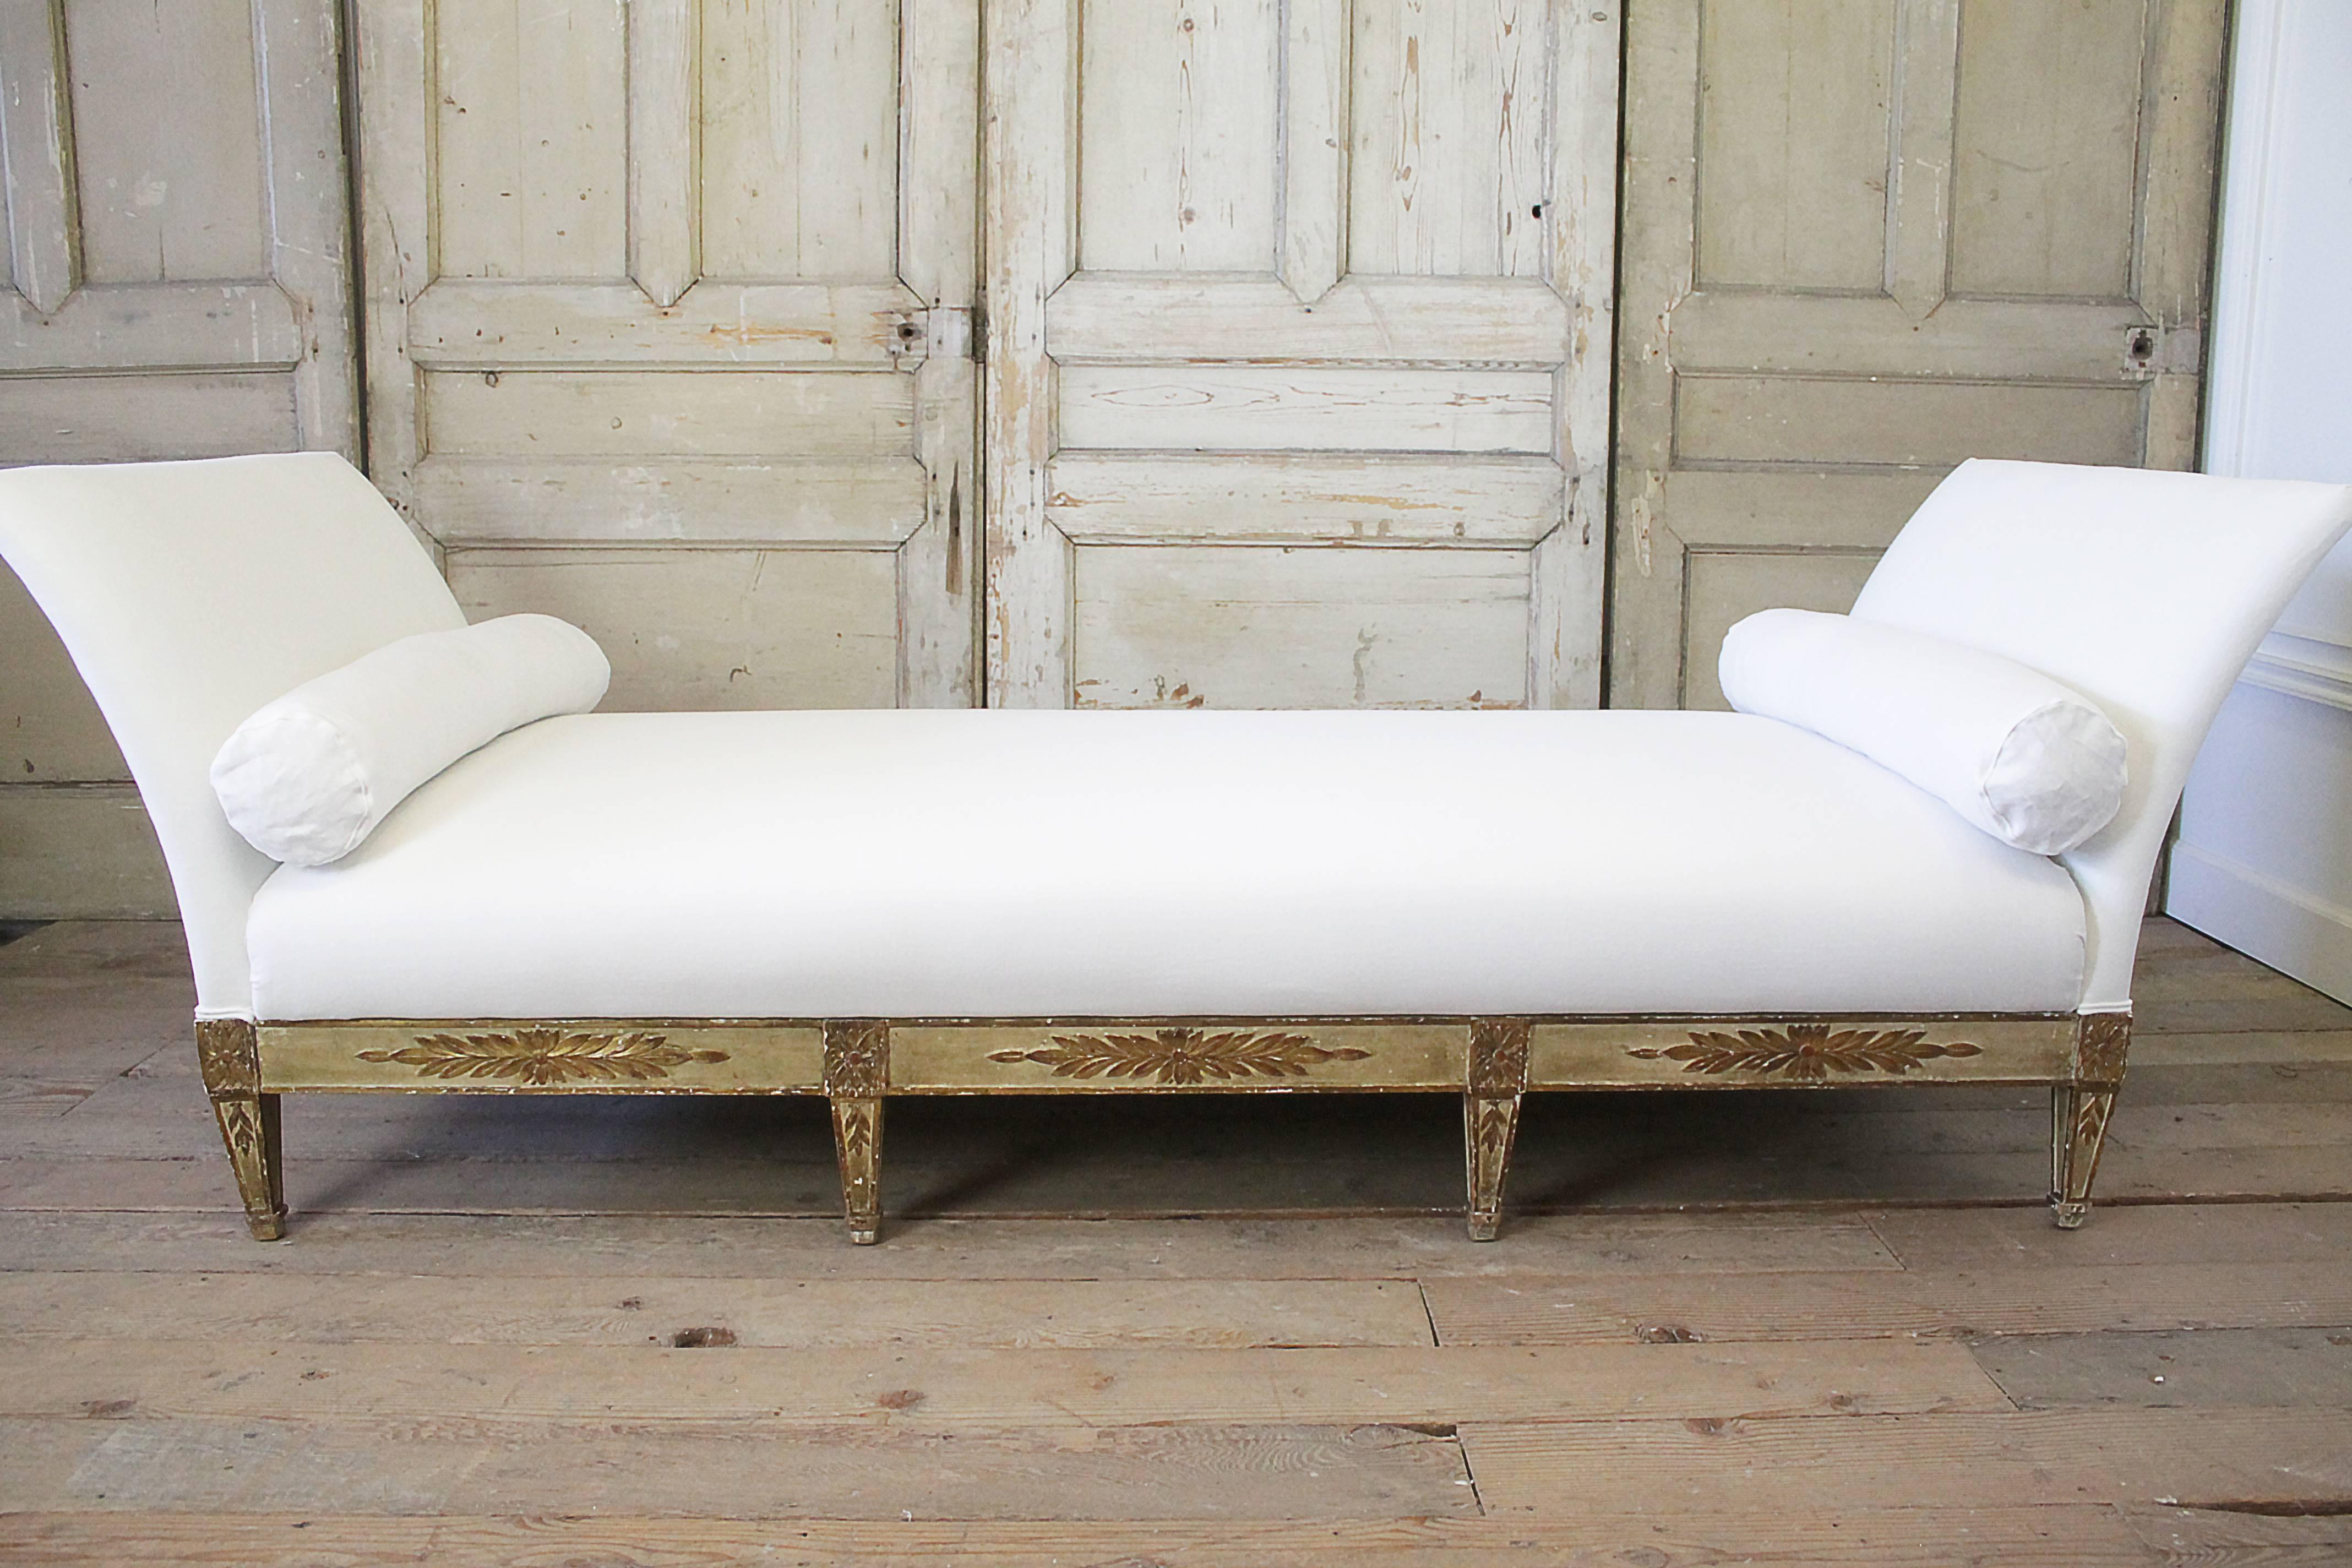 Beautiful painted and gilt daybed upholstered in 100% pure Belgian soft white linen. This daybed has original distressed chippy painted base and legs. It does come apart into five pieces. The headboard and footboard which are the exact same